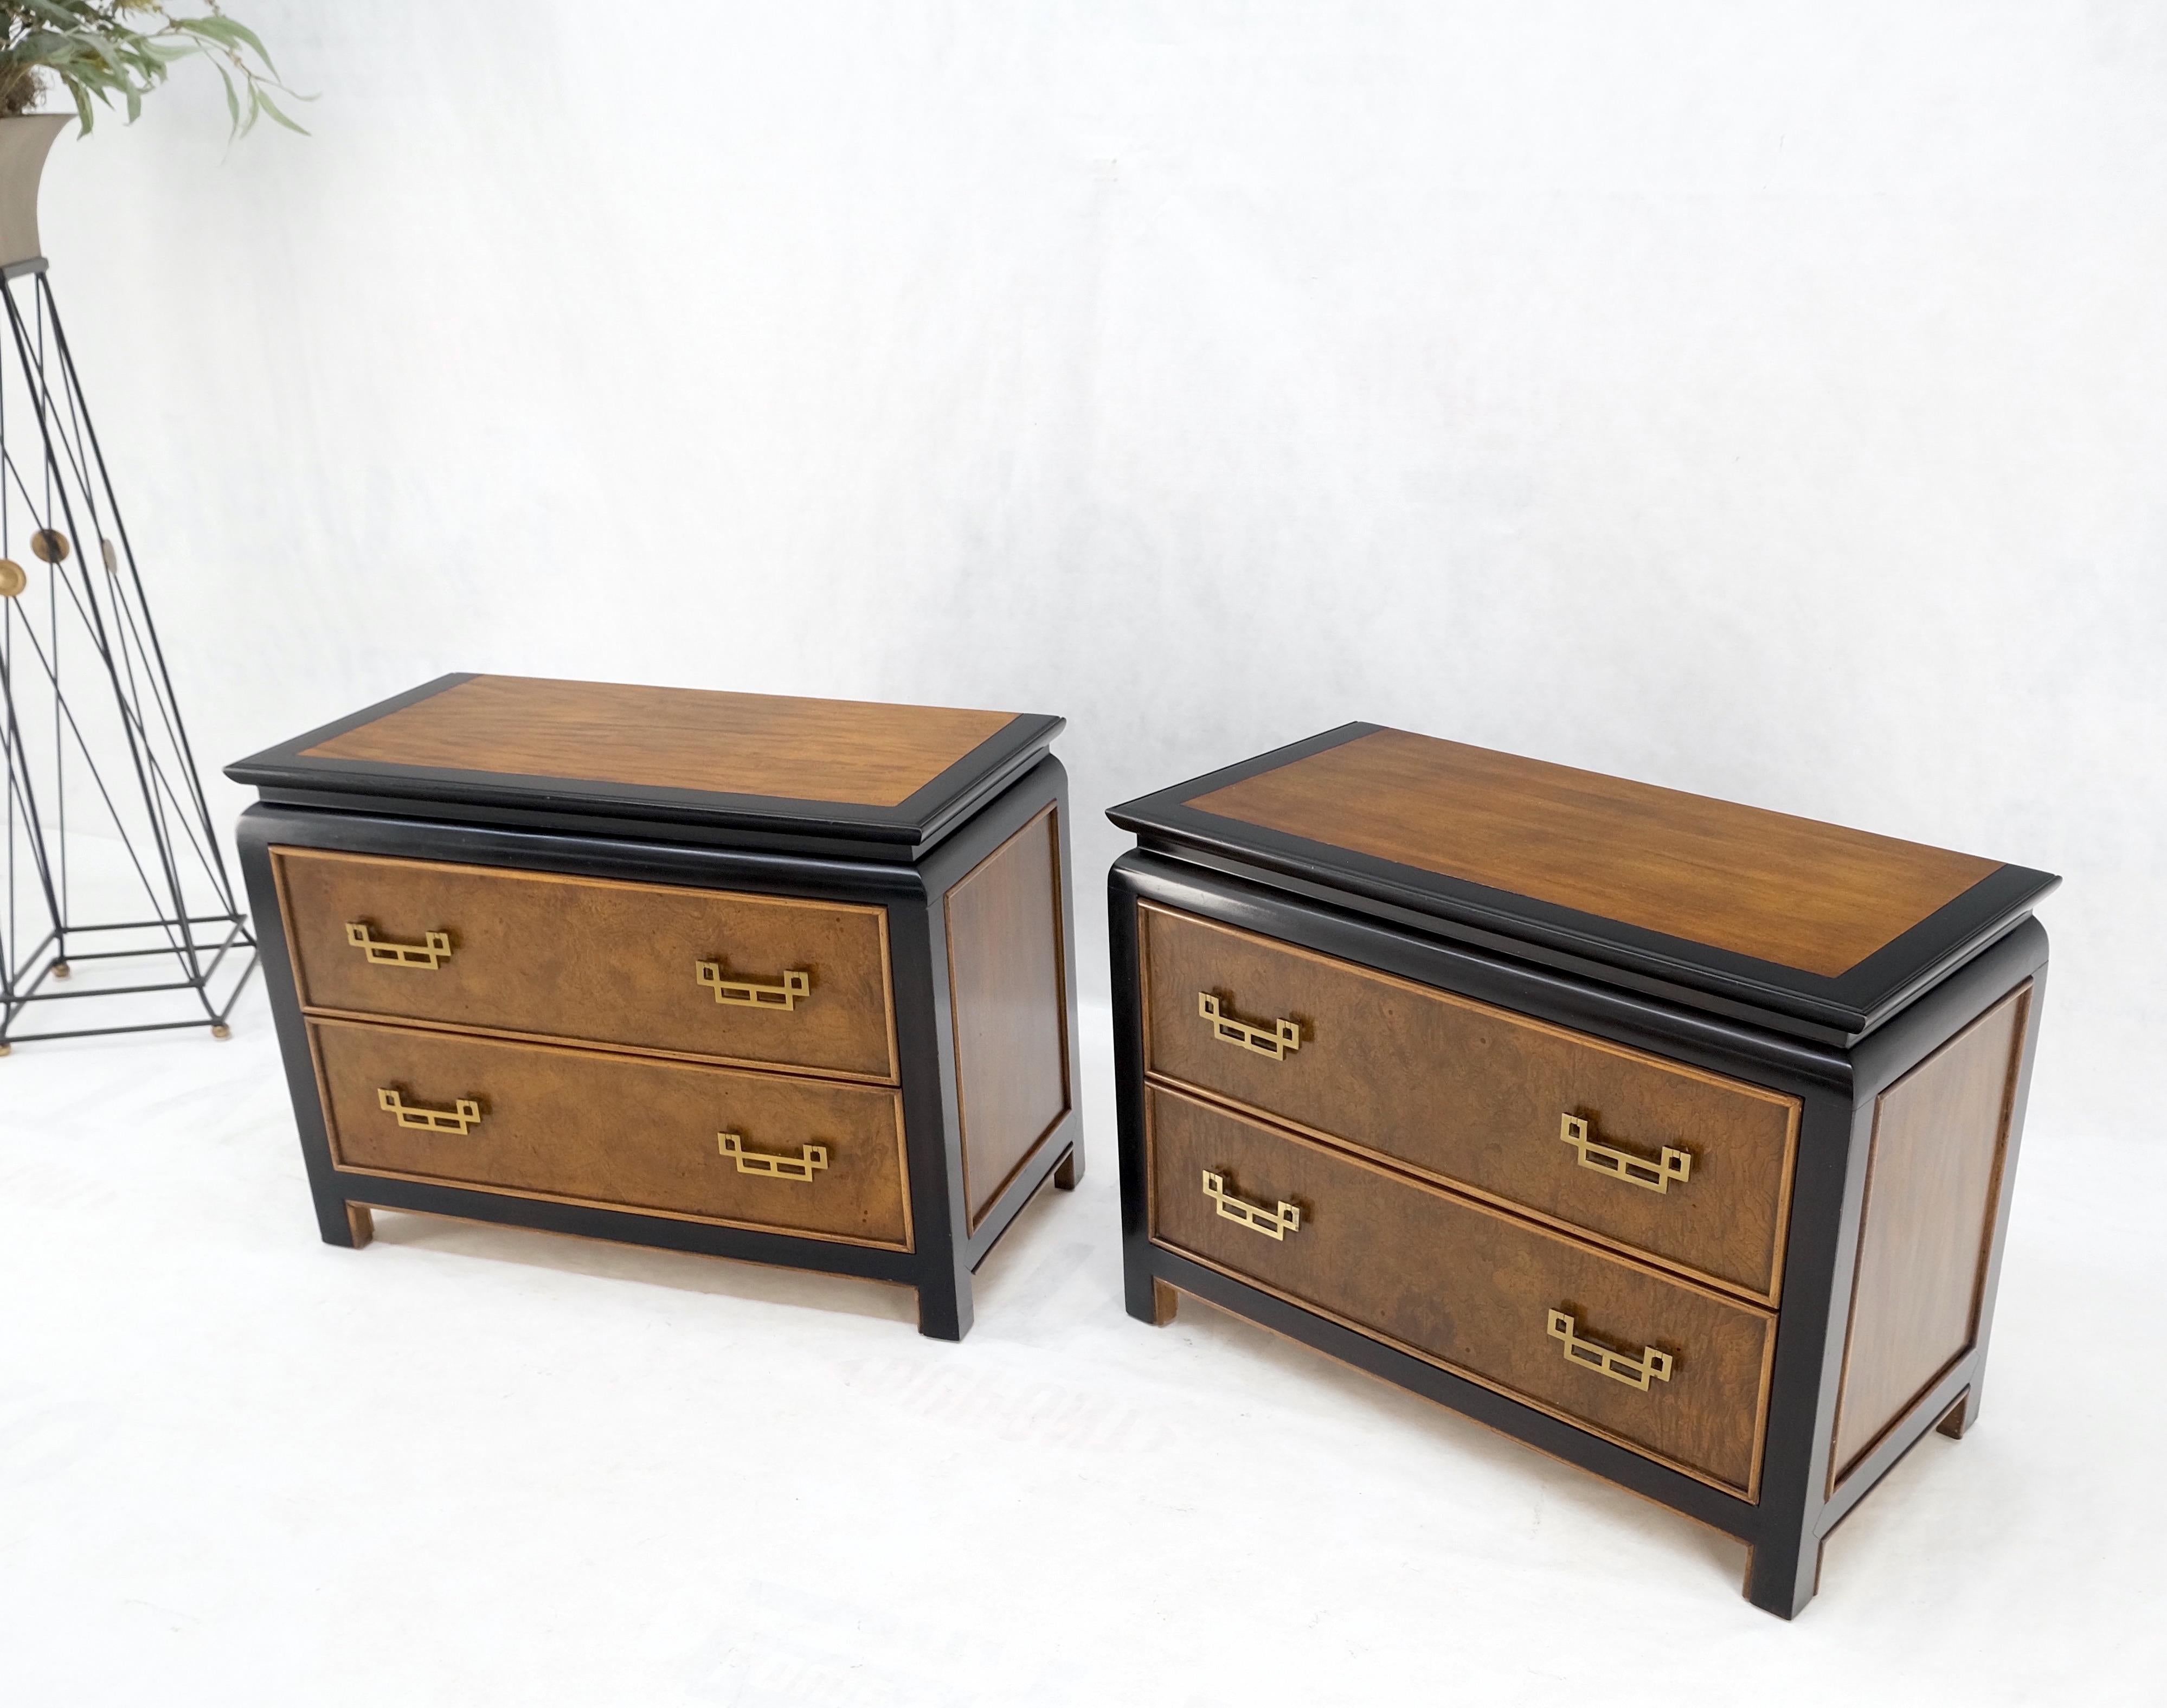 Pair Burl Wood Black Lacquer Solid Brass Drop Pull 2 Drawer Night Stands MINT!.